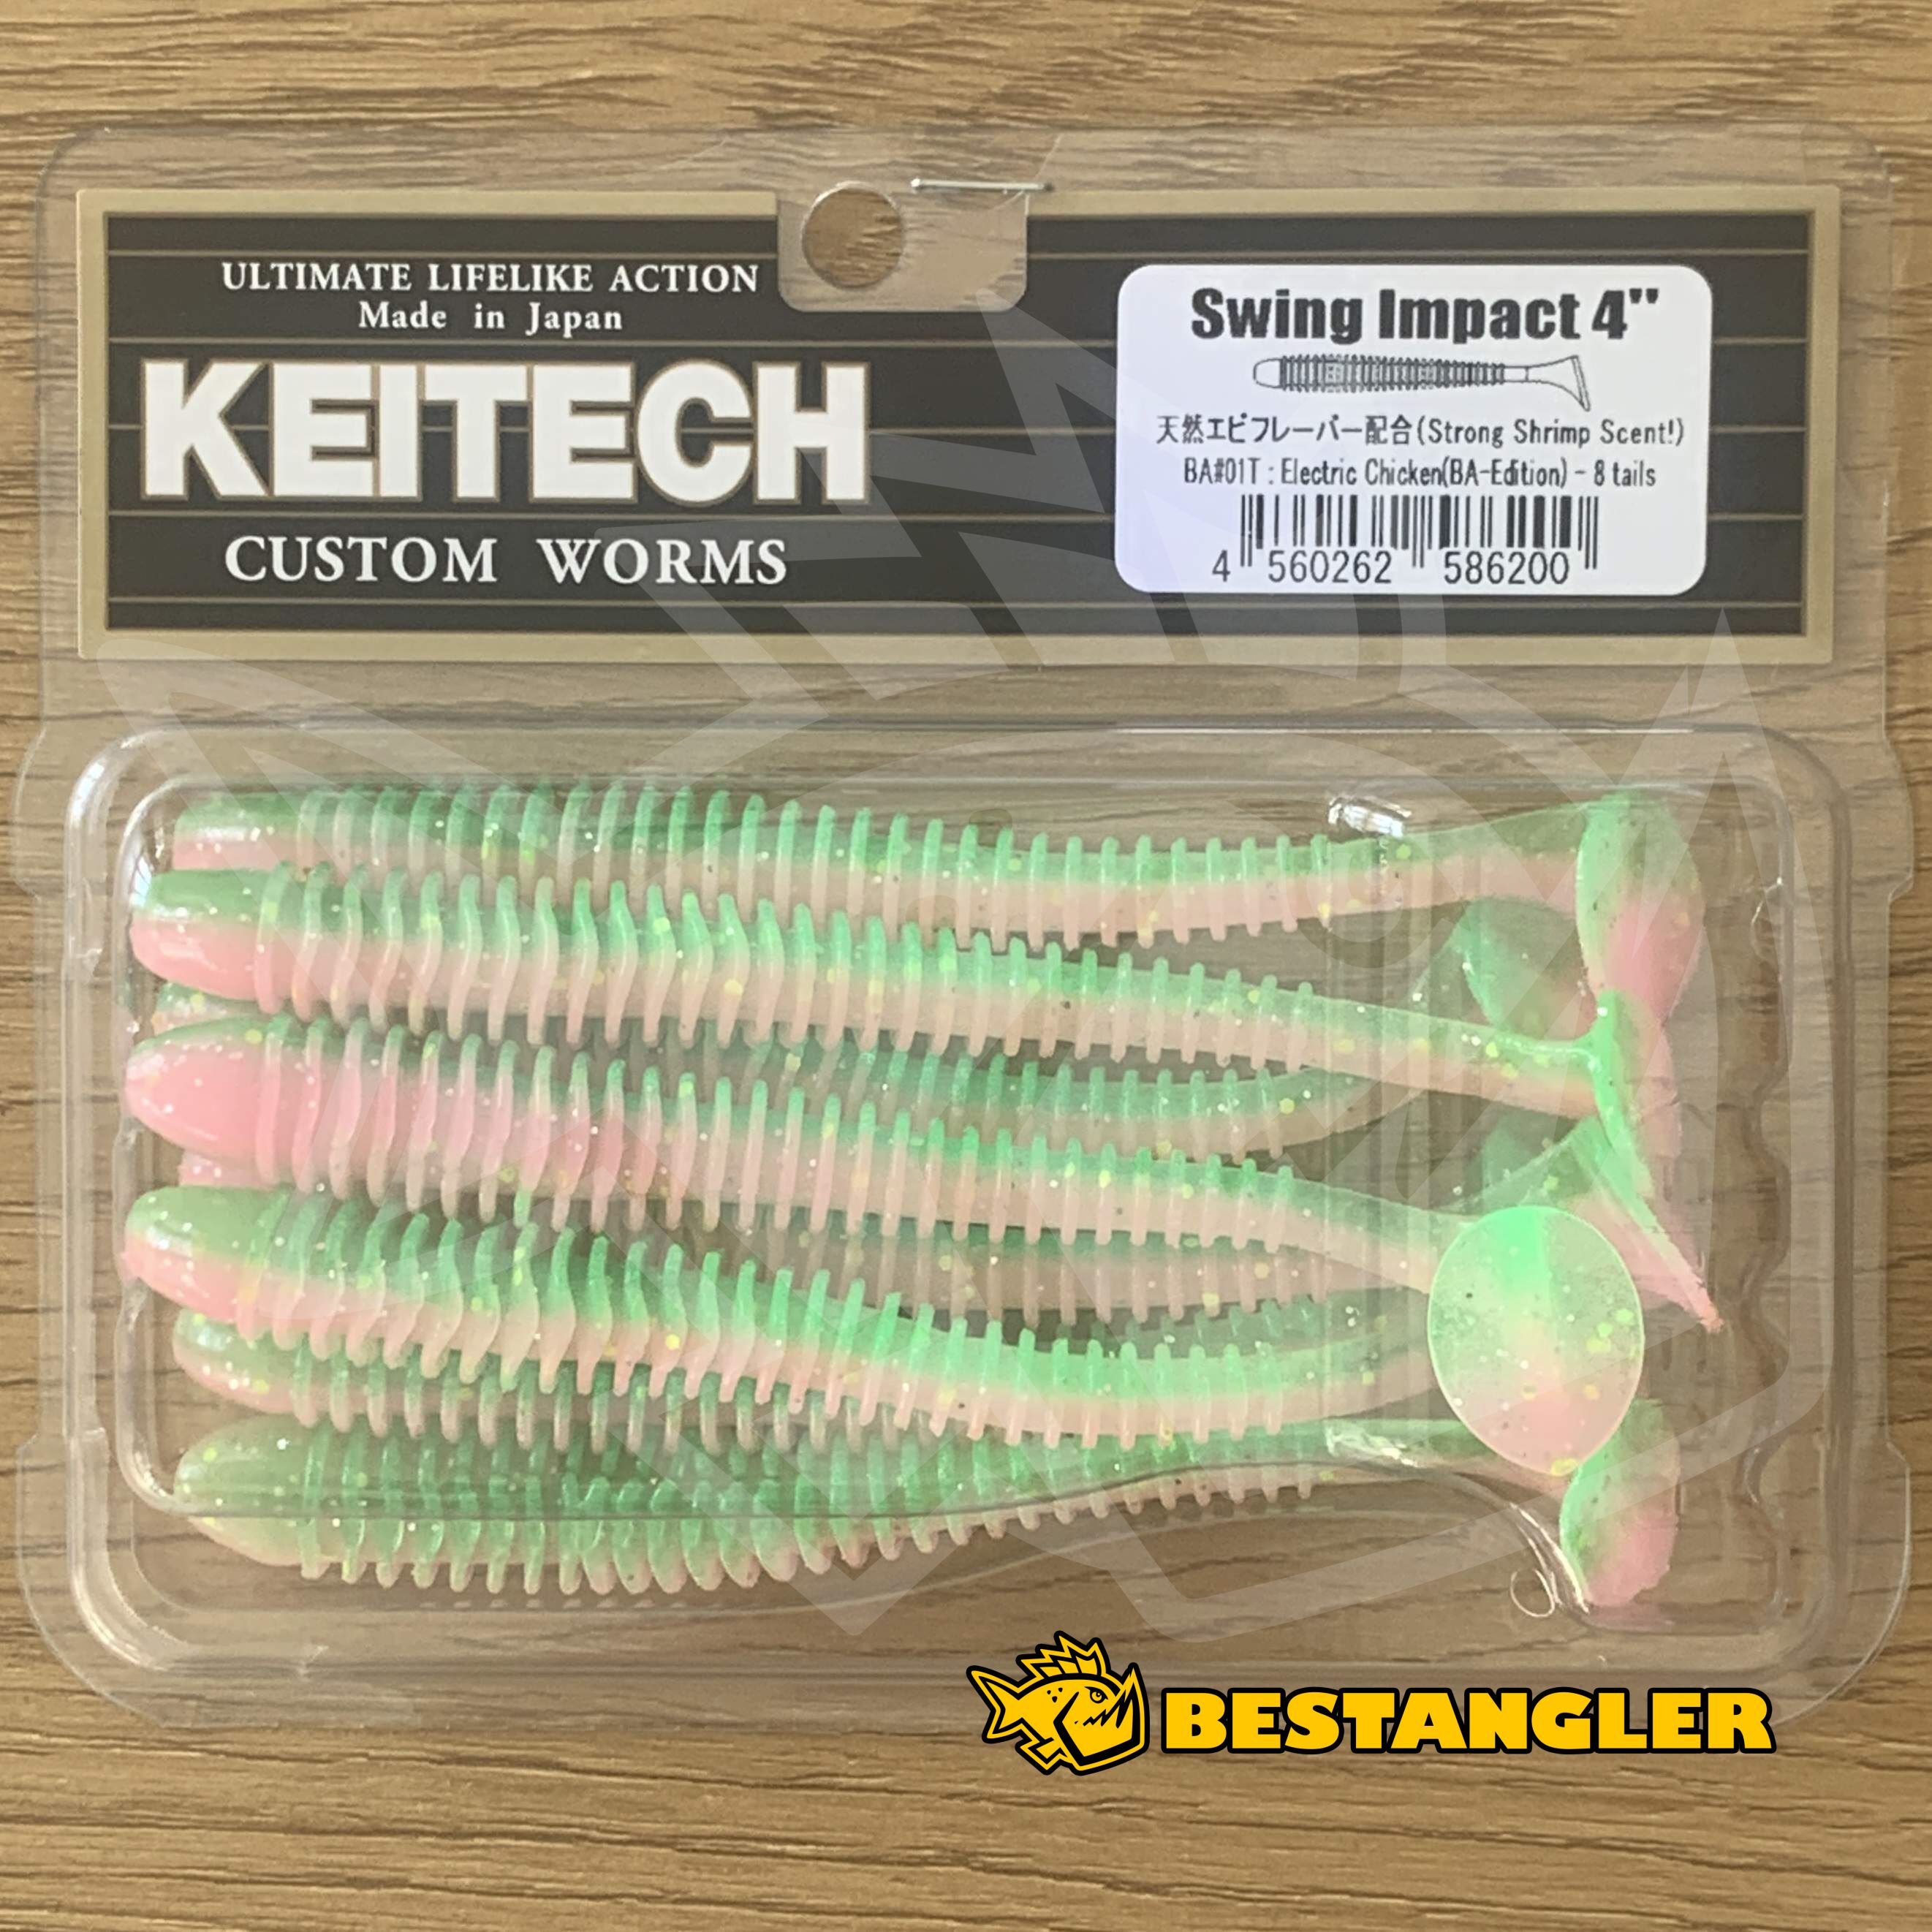 Keitech Easy Shiner 4 Electric Chicken